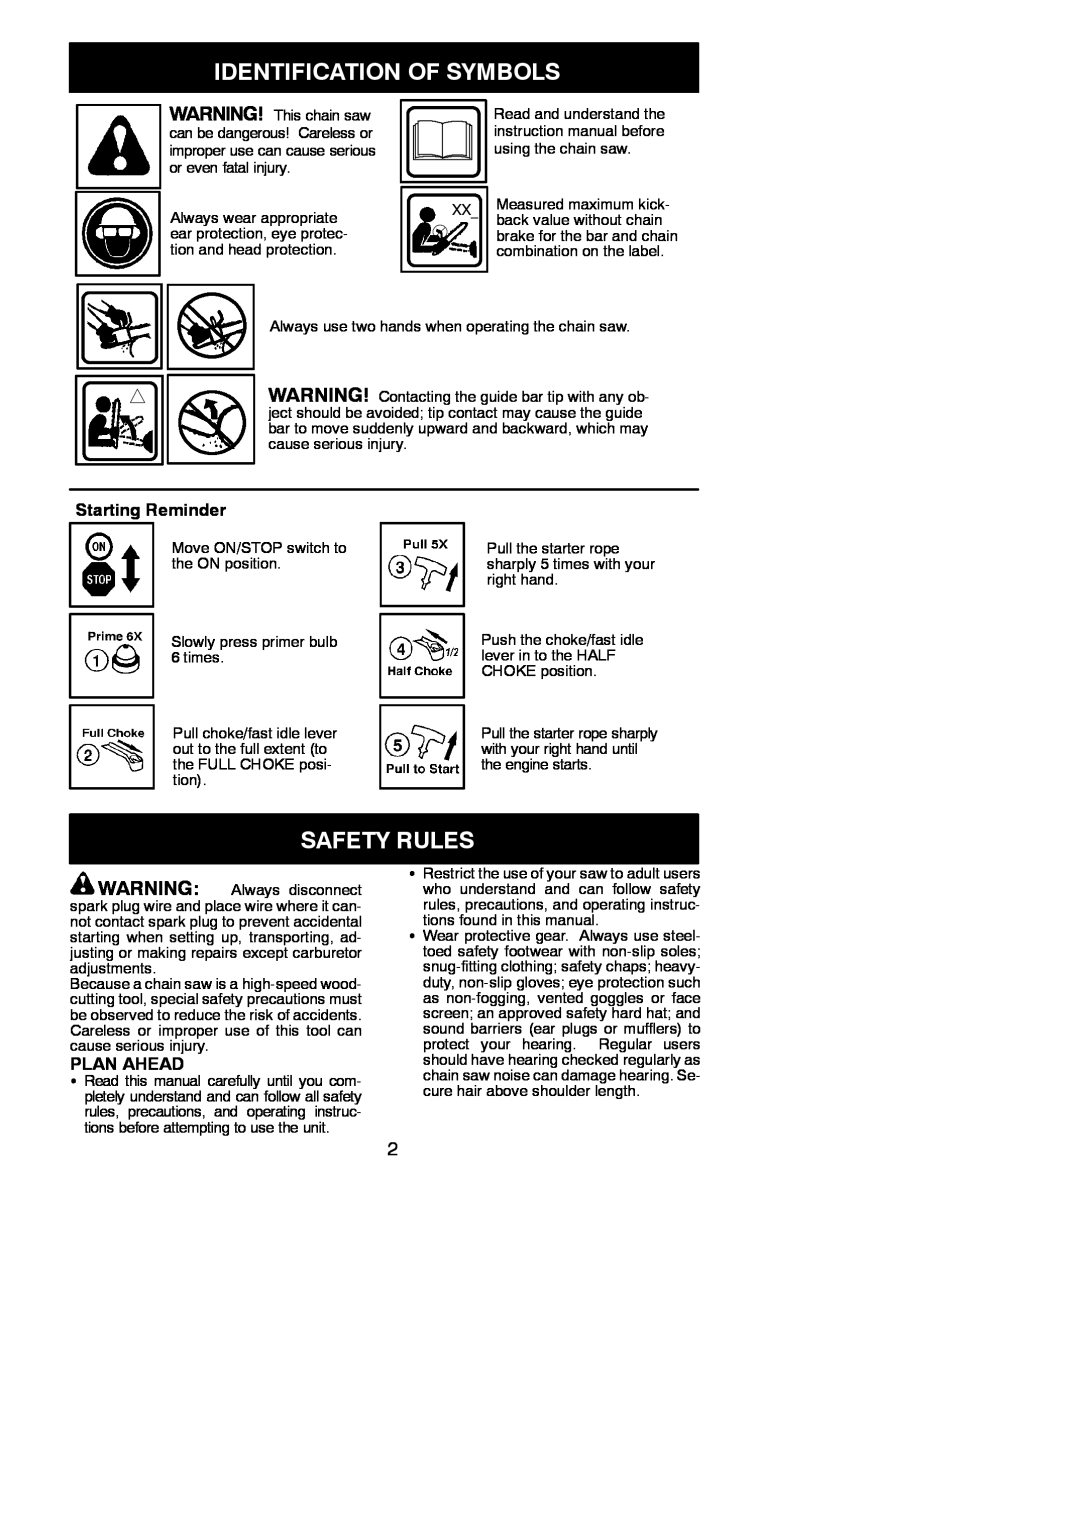 Poulan 966513901 instruction manual Identification Of Symbols, Safety Rules, Starting Reminder, Plan Ahead 